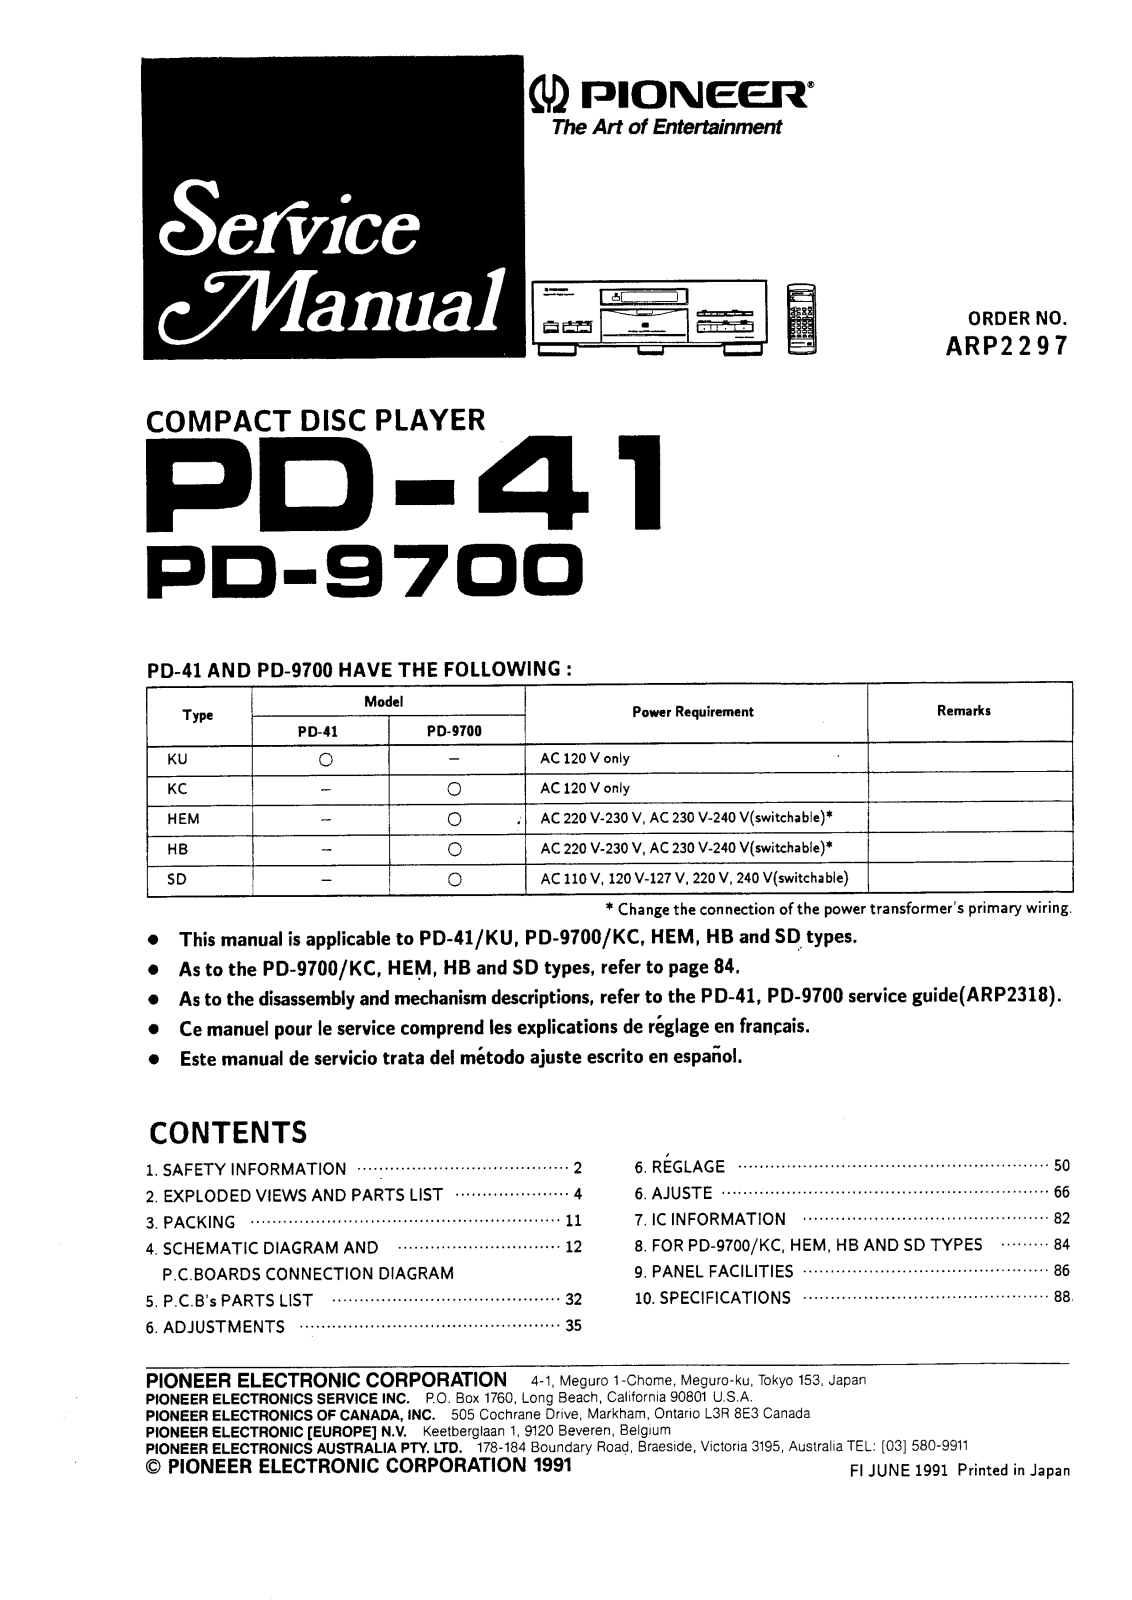 Pioneer PD-41, PD-9700 Service manual